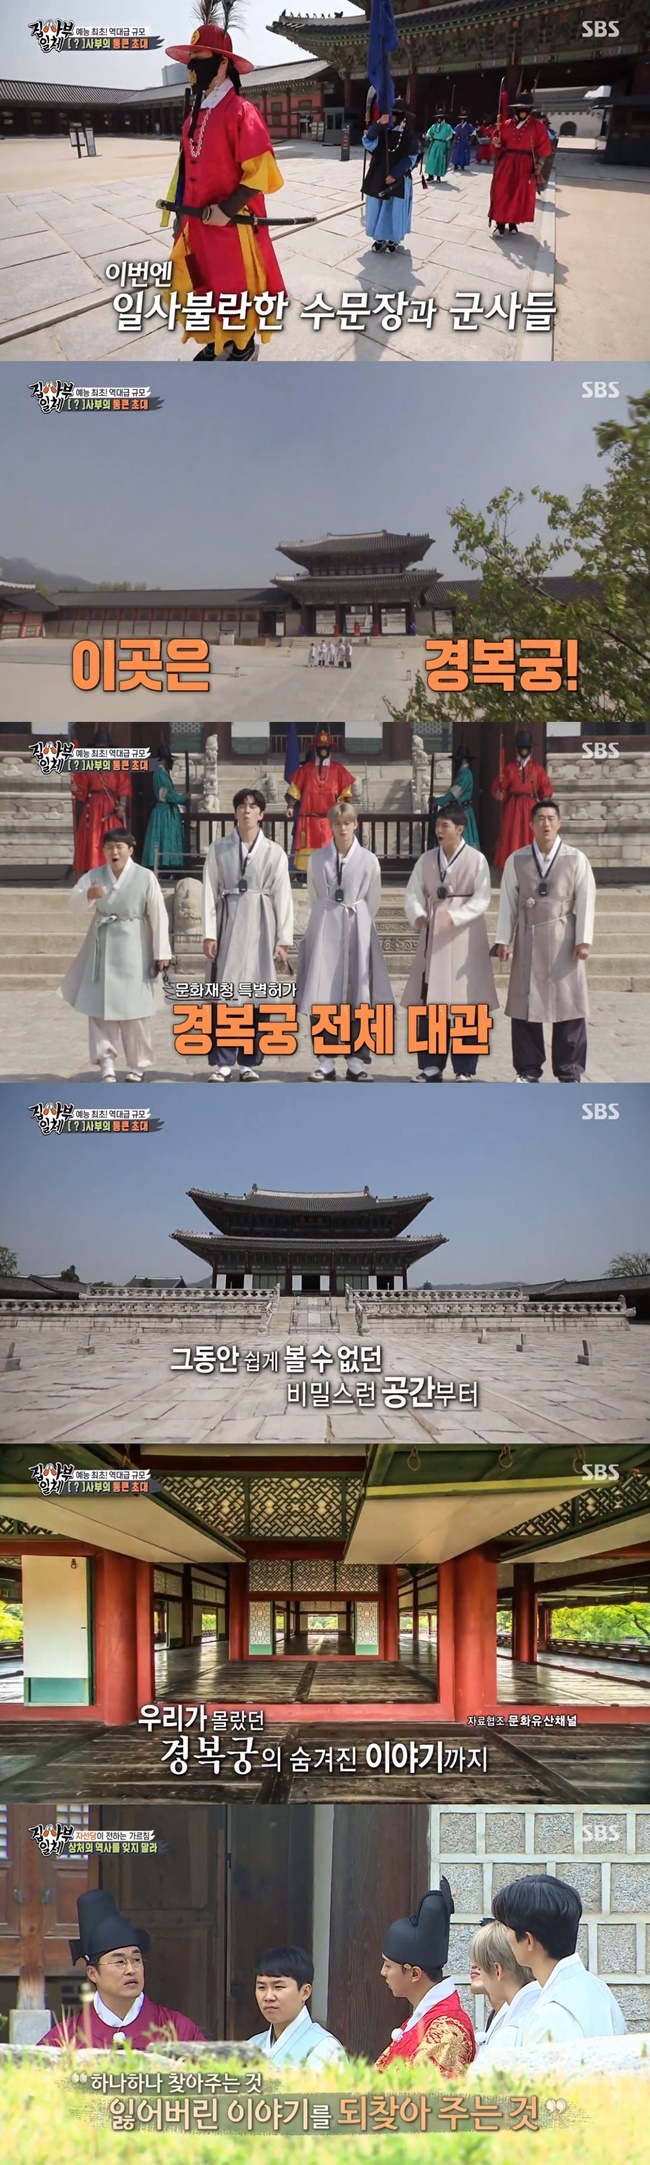 All The Butlers served Gyeongbokgung as a non-person master.This is SBSs A New Leaf, which was hit directly by the history distribution controversy.On May 2, SBS All The Butlers was featured as a special permission from the Cultural Heritage Administration, which was the first Gyeongbokgung of the entertainment industry.On this day, Gyeongbokgung, the first non-person in All The Butlers, appeared.In order to help the master, histories instructor Choi Tae-seong became a cadet, and child actor Kim Kang-hoon transformed into a child who loves the palace Goodbye My Princess.In particular, along with the explanation of Choi Tae-seong, the inside of the gyeongbokgung, such as Gyeonghoeru and the charity, which were not easily seen in the entertainment, was revealed.Among them, Kim Kang-hoon, who introduced himself as Goodbye My Princess suddenly disappears, added storytelling expressing the pain of our history and cultural assets at the time of Korea under Japan rule.Choi Tae-seong said, It is a mission to restore the lost story, and to restore the lost history to our descendants.Especially, the broadcast was detailed from the first Gyeongbokgung whole grand prize to the storytelling recalling the pain of Korea under Japan rule.In addition, the cast was dressed in hanbok or the gymnasium was placed in various places inside the gymnasium to increase the immersion.It does not explain the knowledge of Histories unilaterally, but it is content so that the cast and viewers can participate together to discuss the flow of Histories.Above all, All The Butlers gyeongbokgung is more eye-catching because SBS has been hit by the controversy over the history distribution.The drama Chosun Gummasa, which was first broadcast in March, was caught up in the controversy over the history distribution due to the characters set up based on the actual characters and the Chinese props.At that time, many viewers were strongly opposed to the controversy, and advertisements and sponsors shouted loss and Chosun Gummasa tasted the humiliation of ending in just two times.In addition, the Northeast Fair situation is spreading recently, with Chinese netizens insisting that the culture of Korean hanbok, New Years Day, and kimchi is their own.In addition, John Mark Ramsier, a professor at Harvard Law School, has been distorting victims of Japanese comfort women as voluntary prostitutes through his paper, and the public is becoming more sensitive to domestic histories.The All The Butlers gyeongbokgung, which appeared in this flow, reexamined the pain of the Korean under Japan rule and recounted the stories we should not forget.In addition, through broadcasting, it showed the sense of combining K-contents in various places such as Hanbok, old play, Korean language, and Sura.